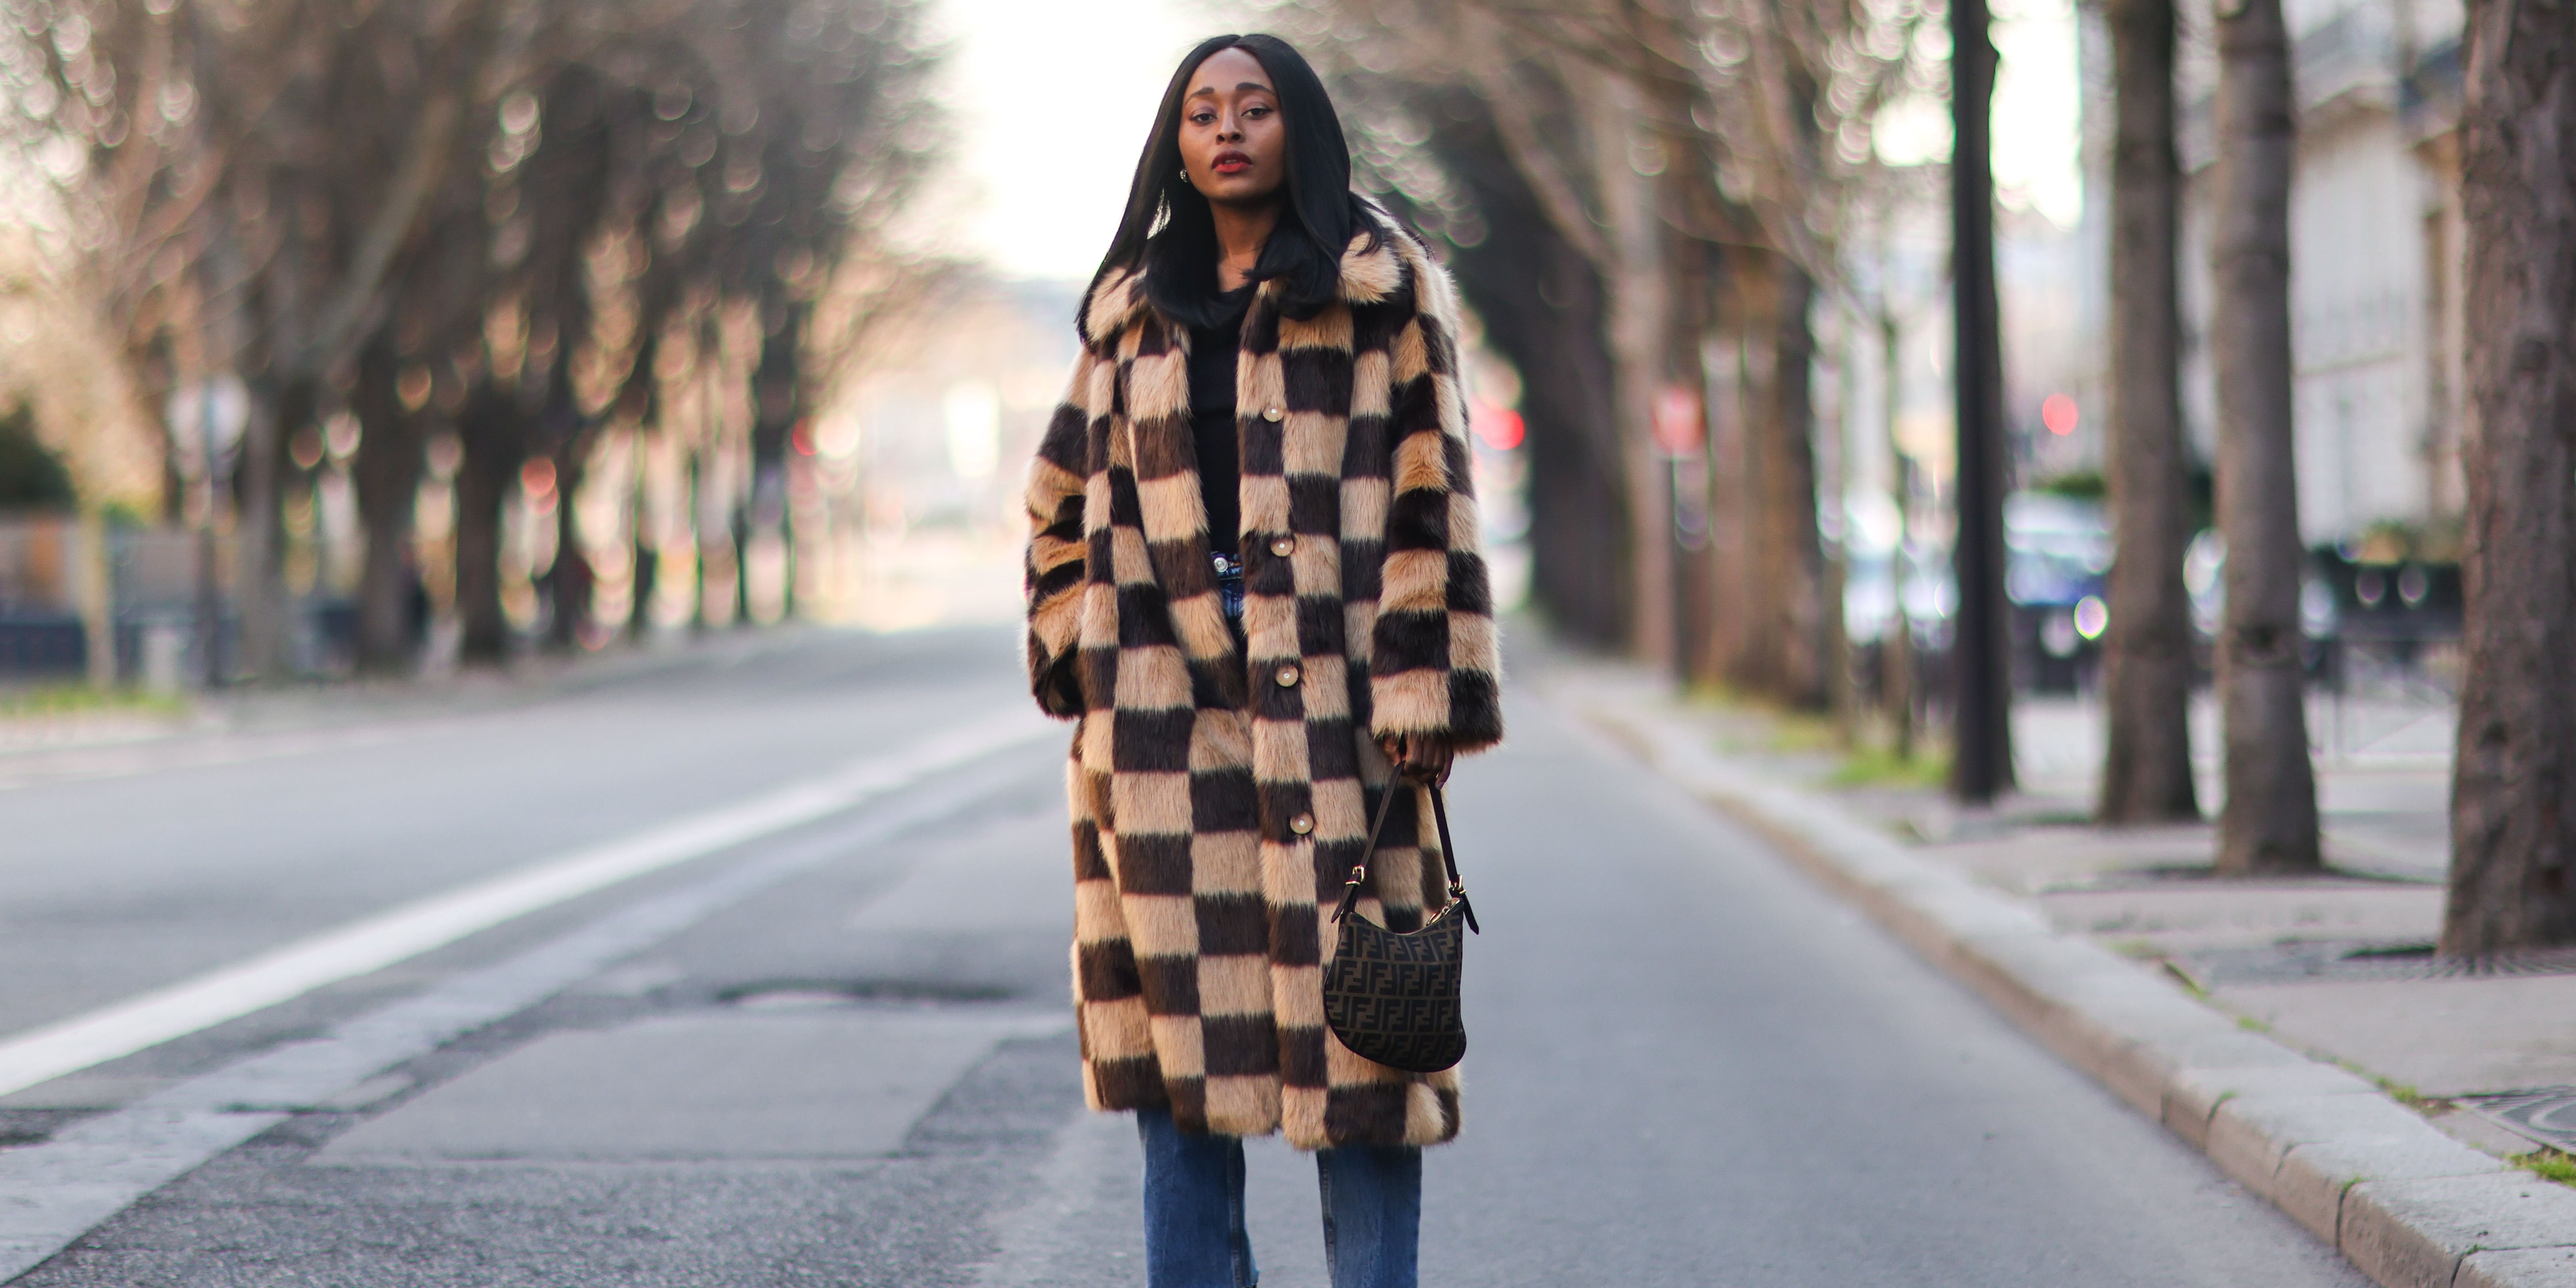 The 22 Best Teddy Bear Coats to Swathe Yourself in This Winter